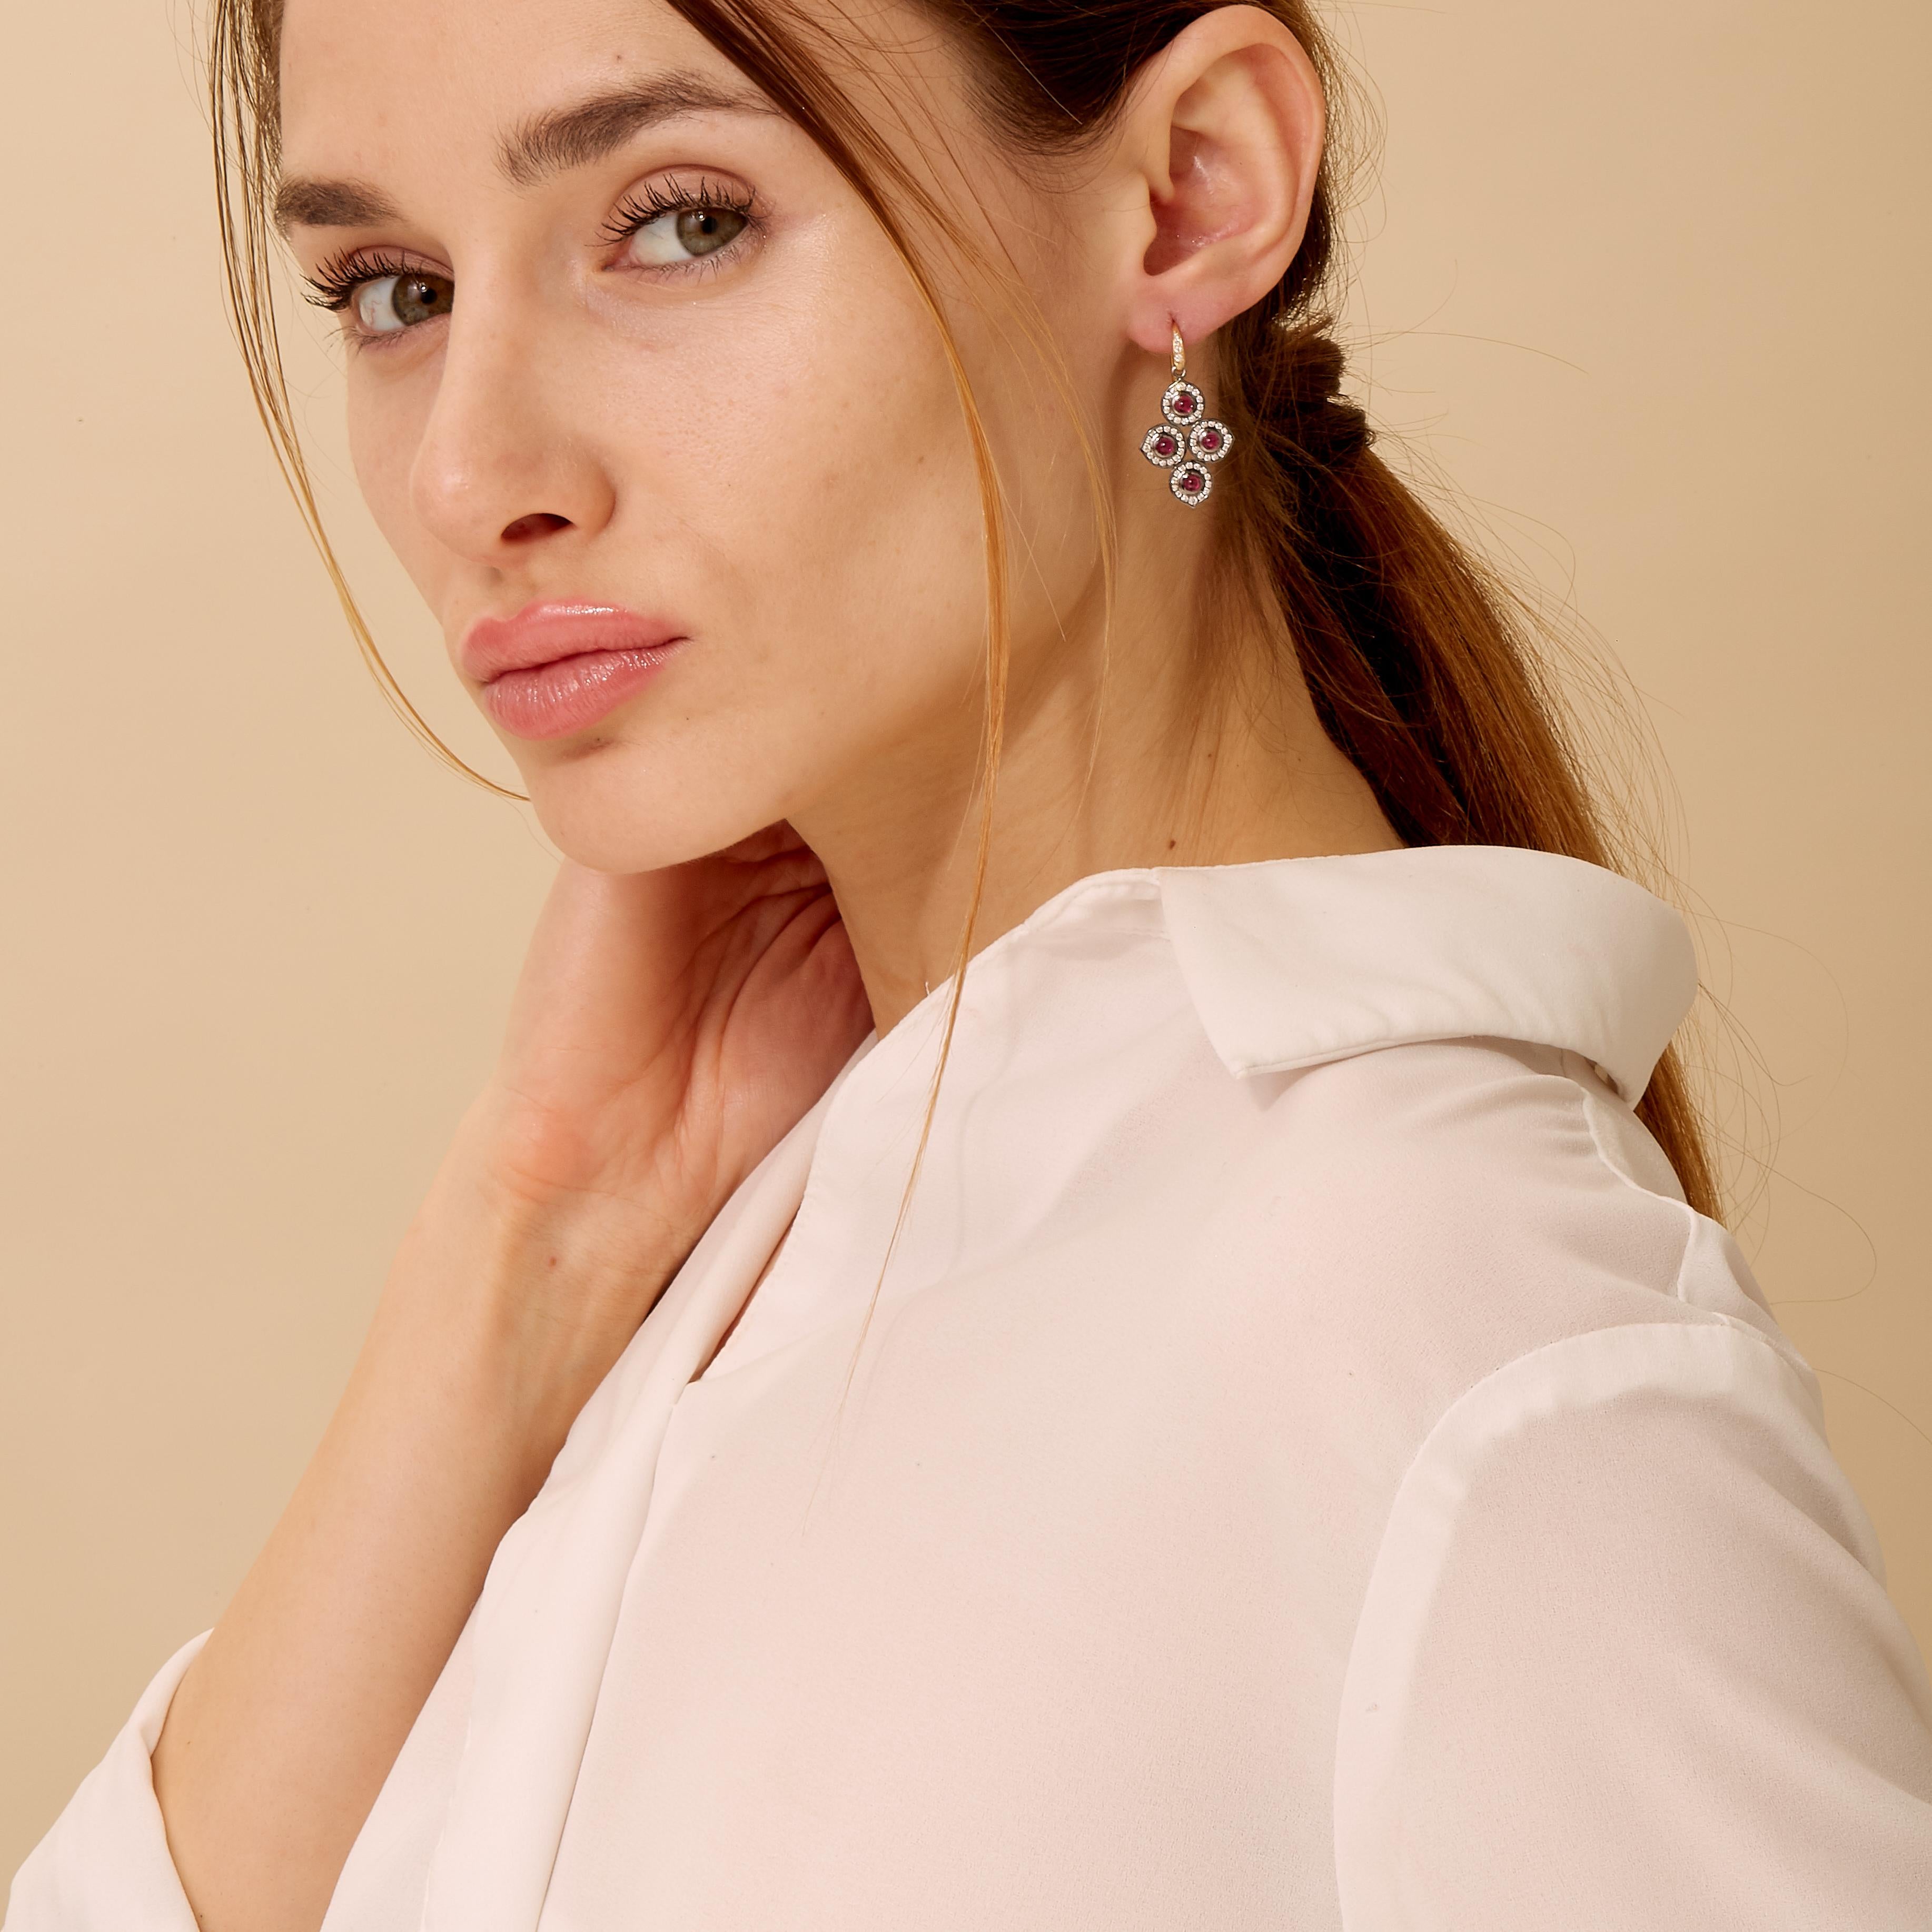 Created in 18kyg & oxidized silver 
Rubies 1.30 carats approx.
Diamonds 0.80 carats approx.
French wire for pierced ears

Experience luxury and elegance with these magnificent Candy Blue Topaz and Moon Quartz Earrings, crafted with 18kyg and